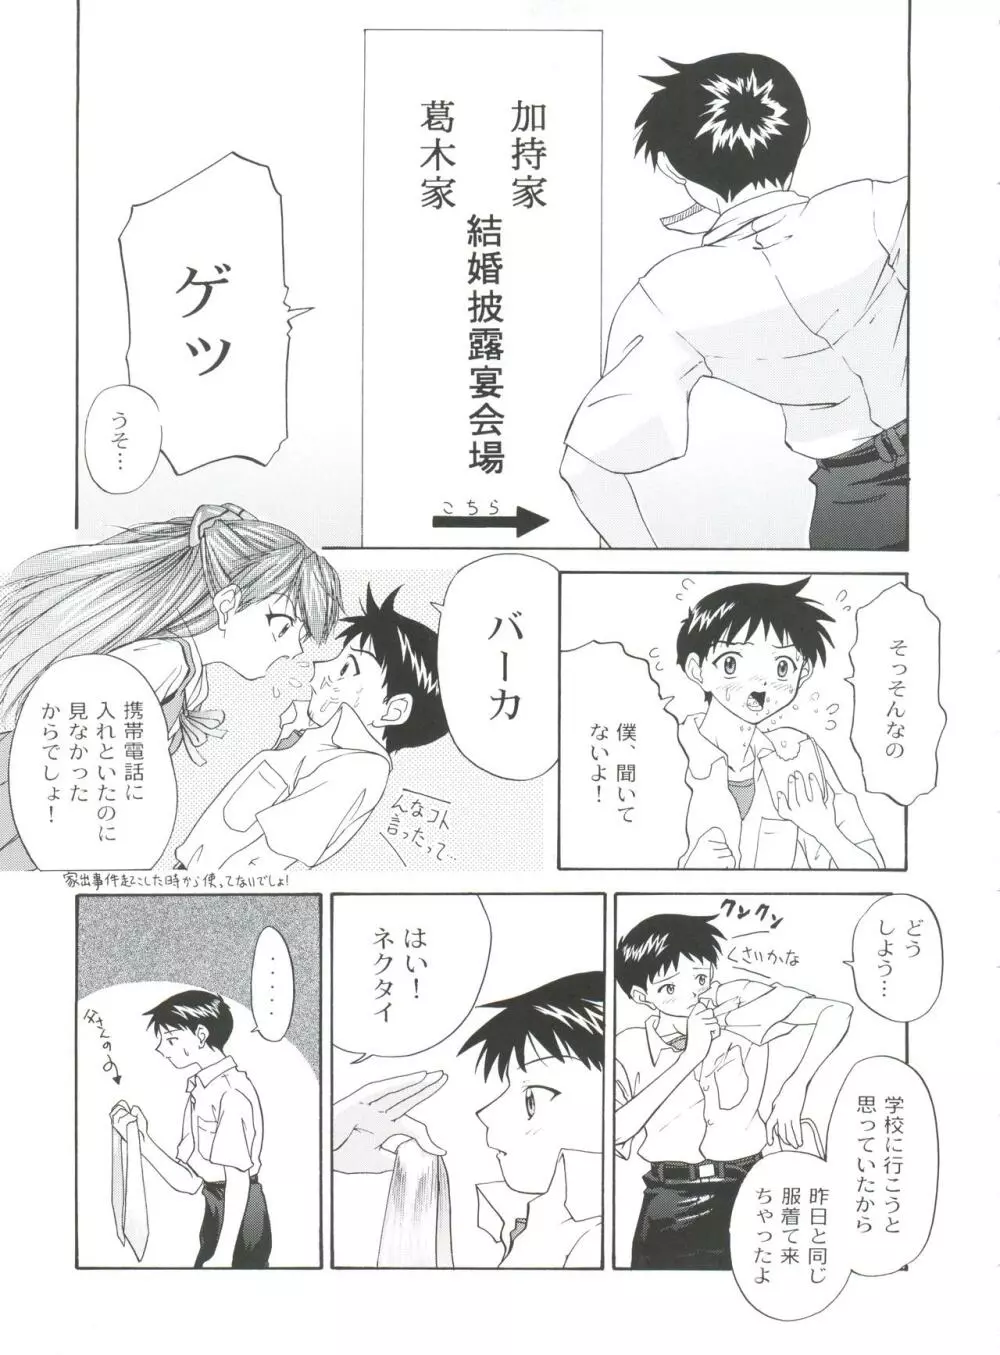 1999 ONLY ASKA - page7